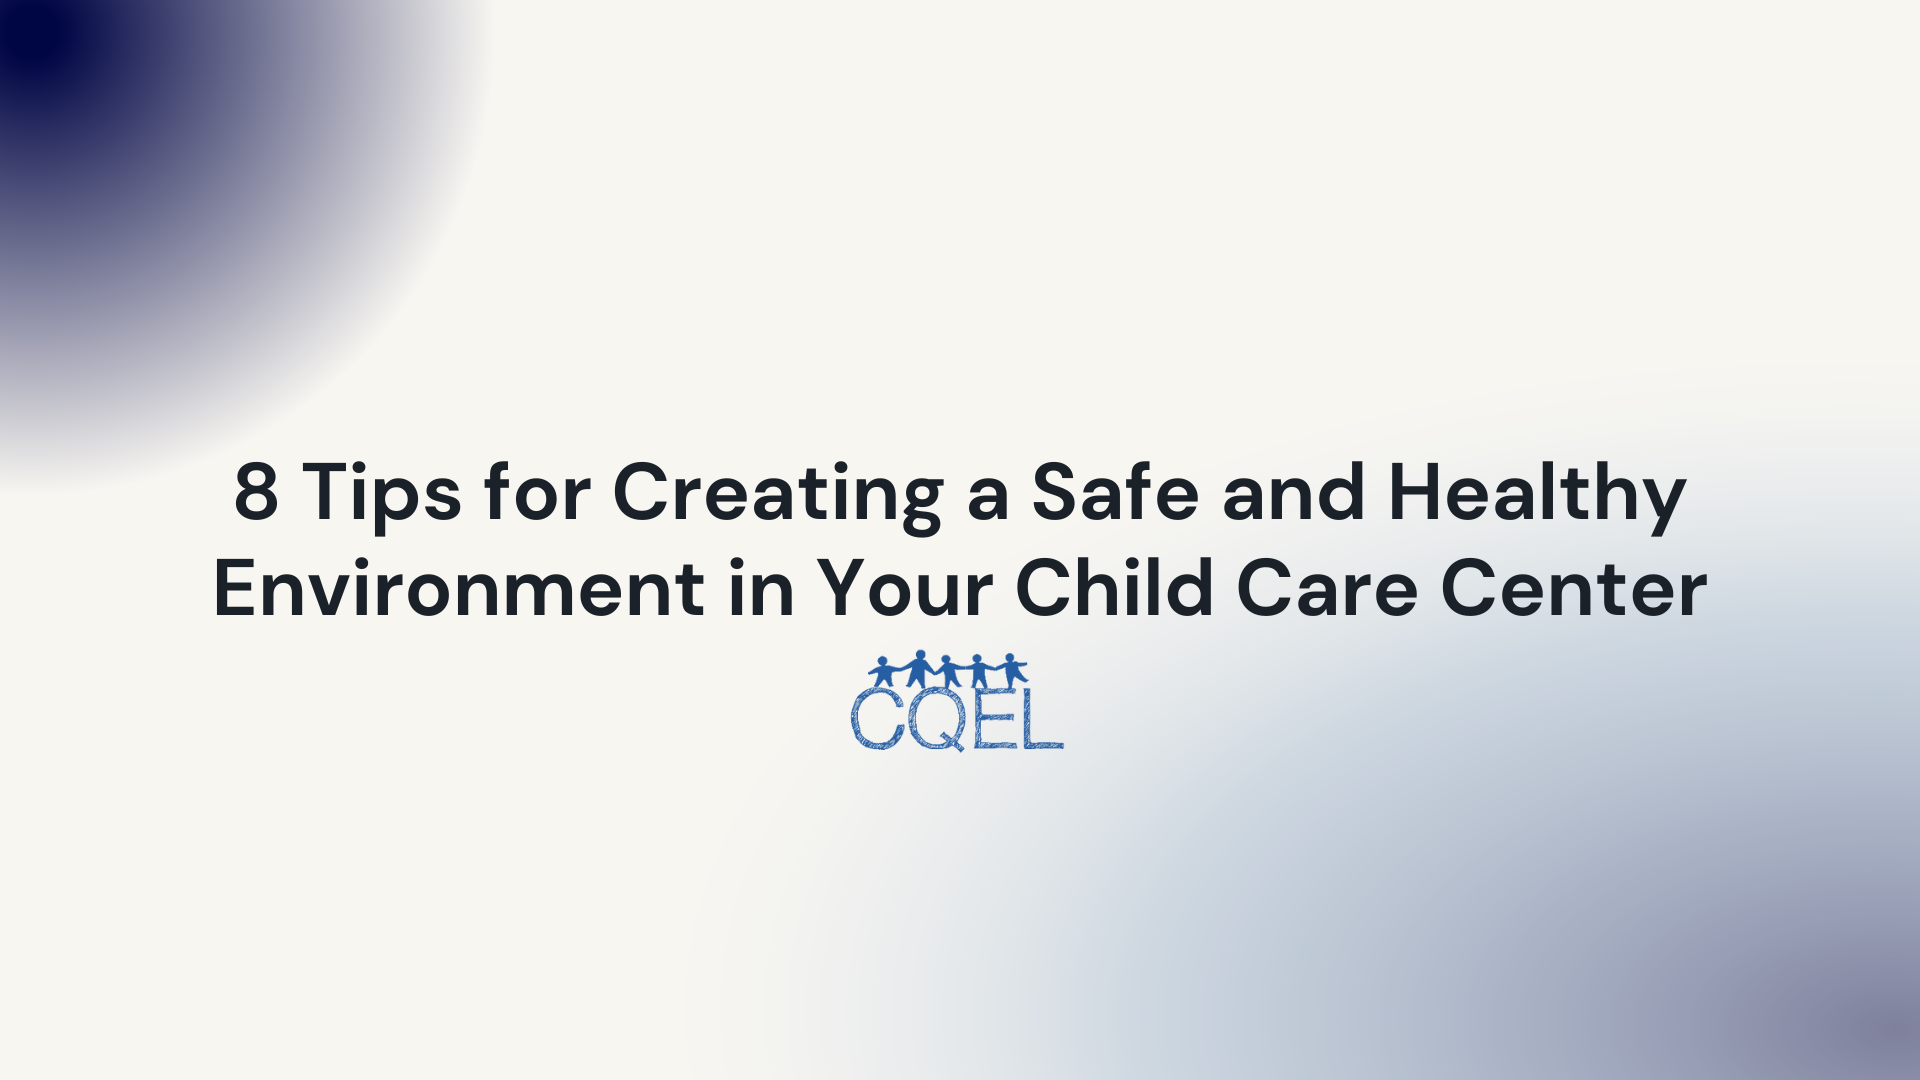 8 Tips for Creating a Safe and Healthy Environment in Your Child Care Center